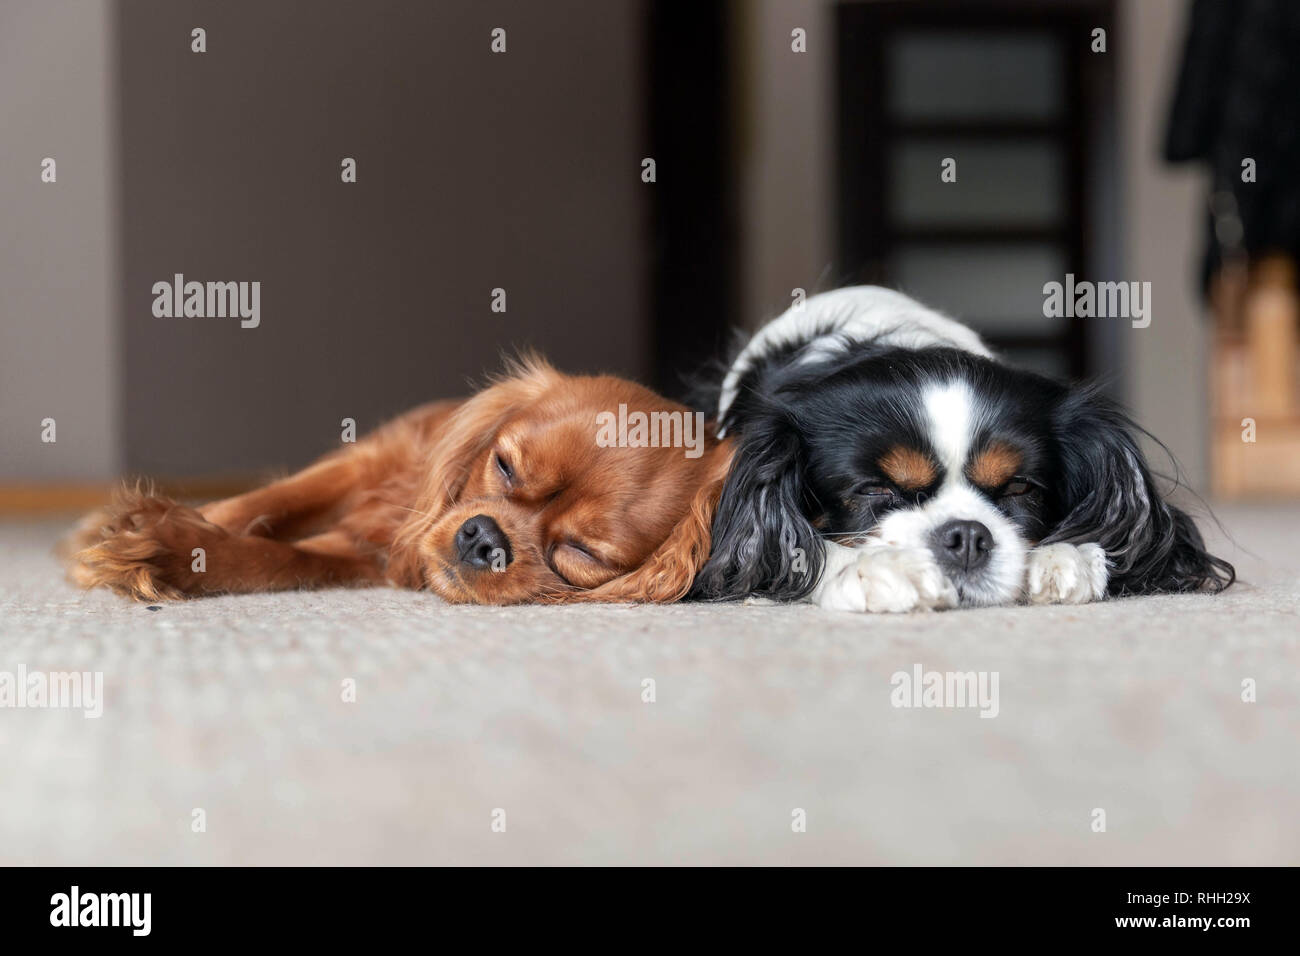 Two dogs sleeping together on the carpet Stock Photo